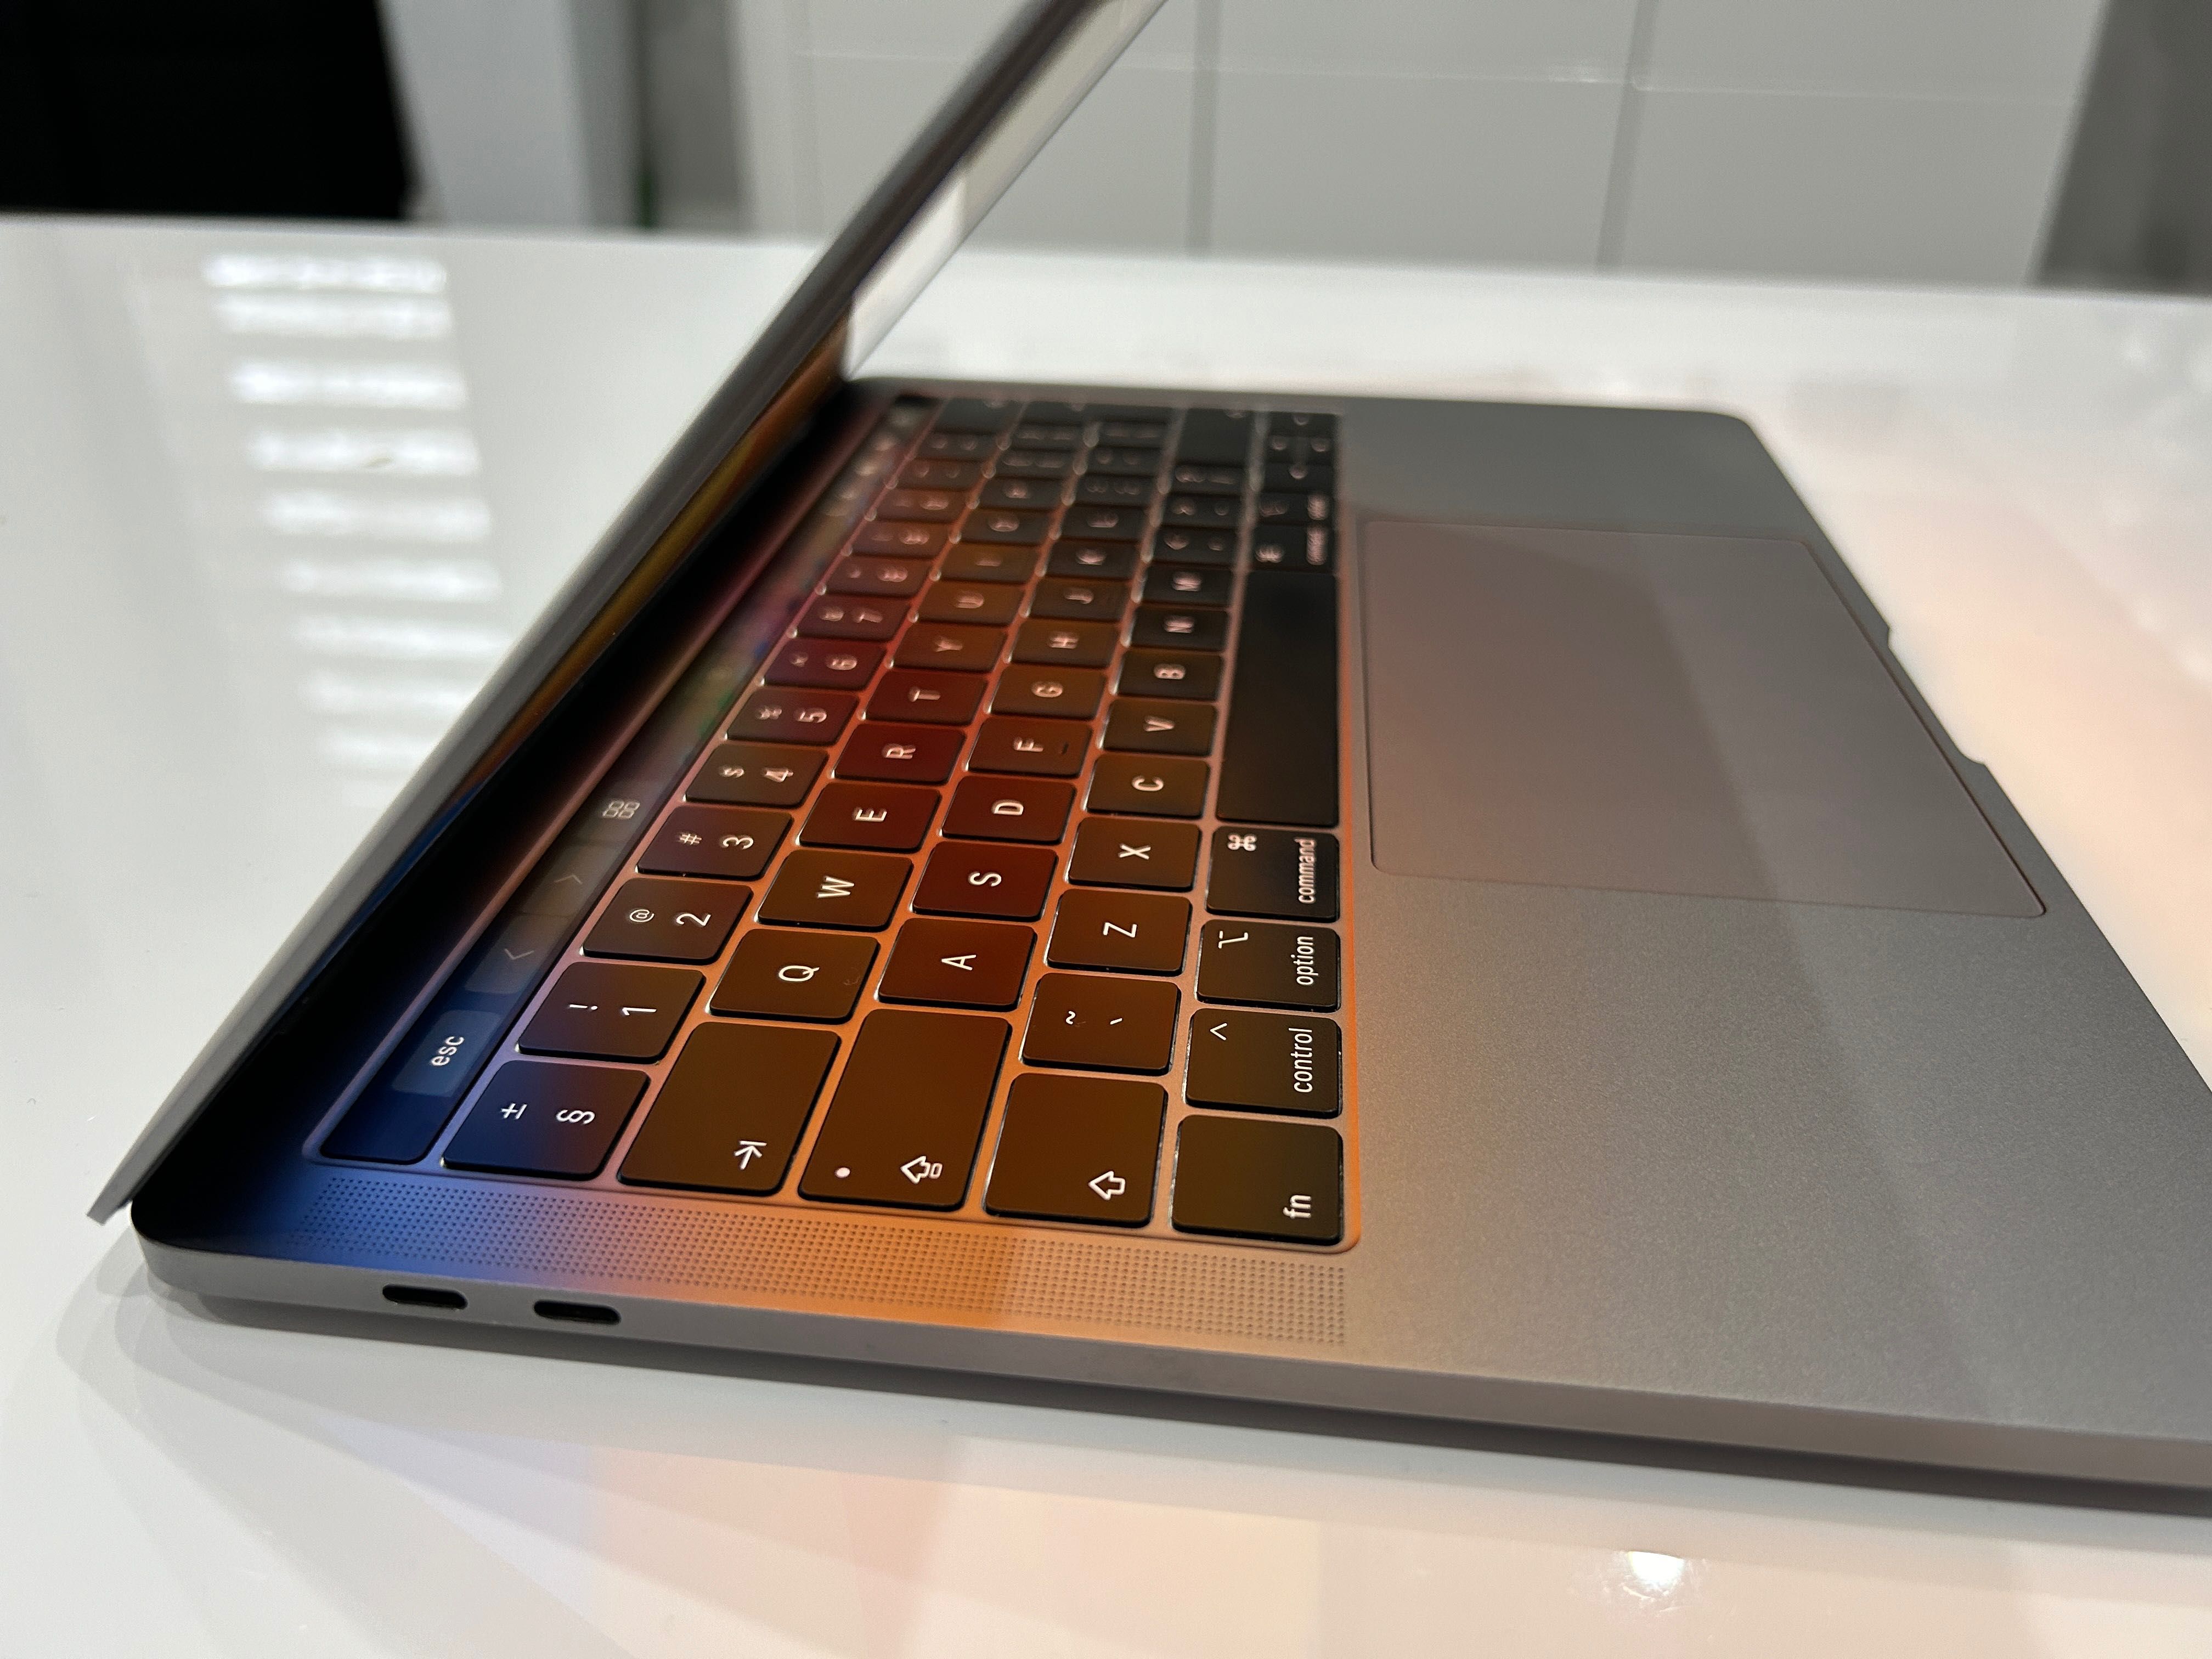 MacBook Pro 13'3 Touch Bar 2019/128GB/8GB/i5 Space Gray Polecam !!!